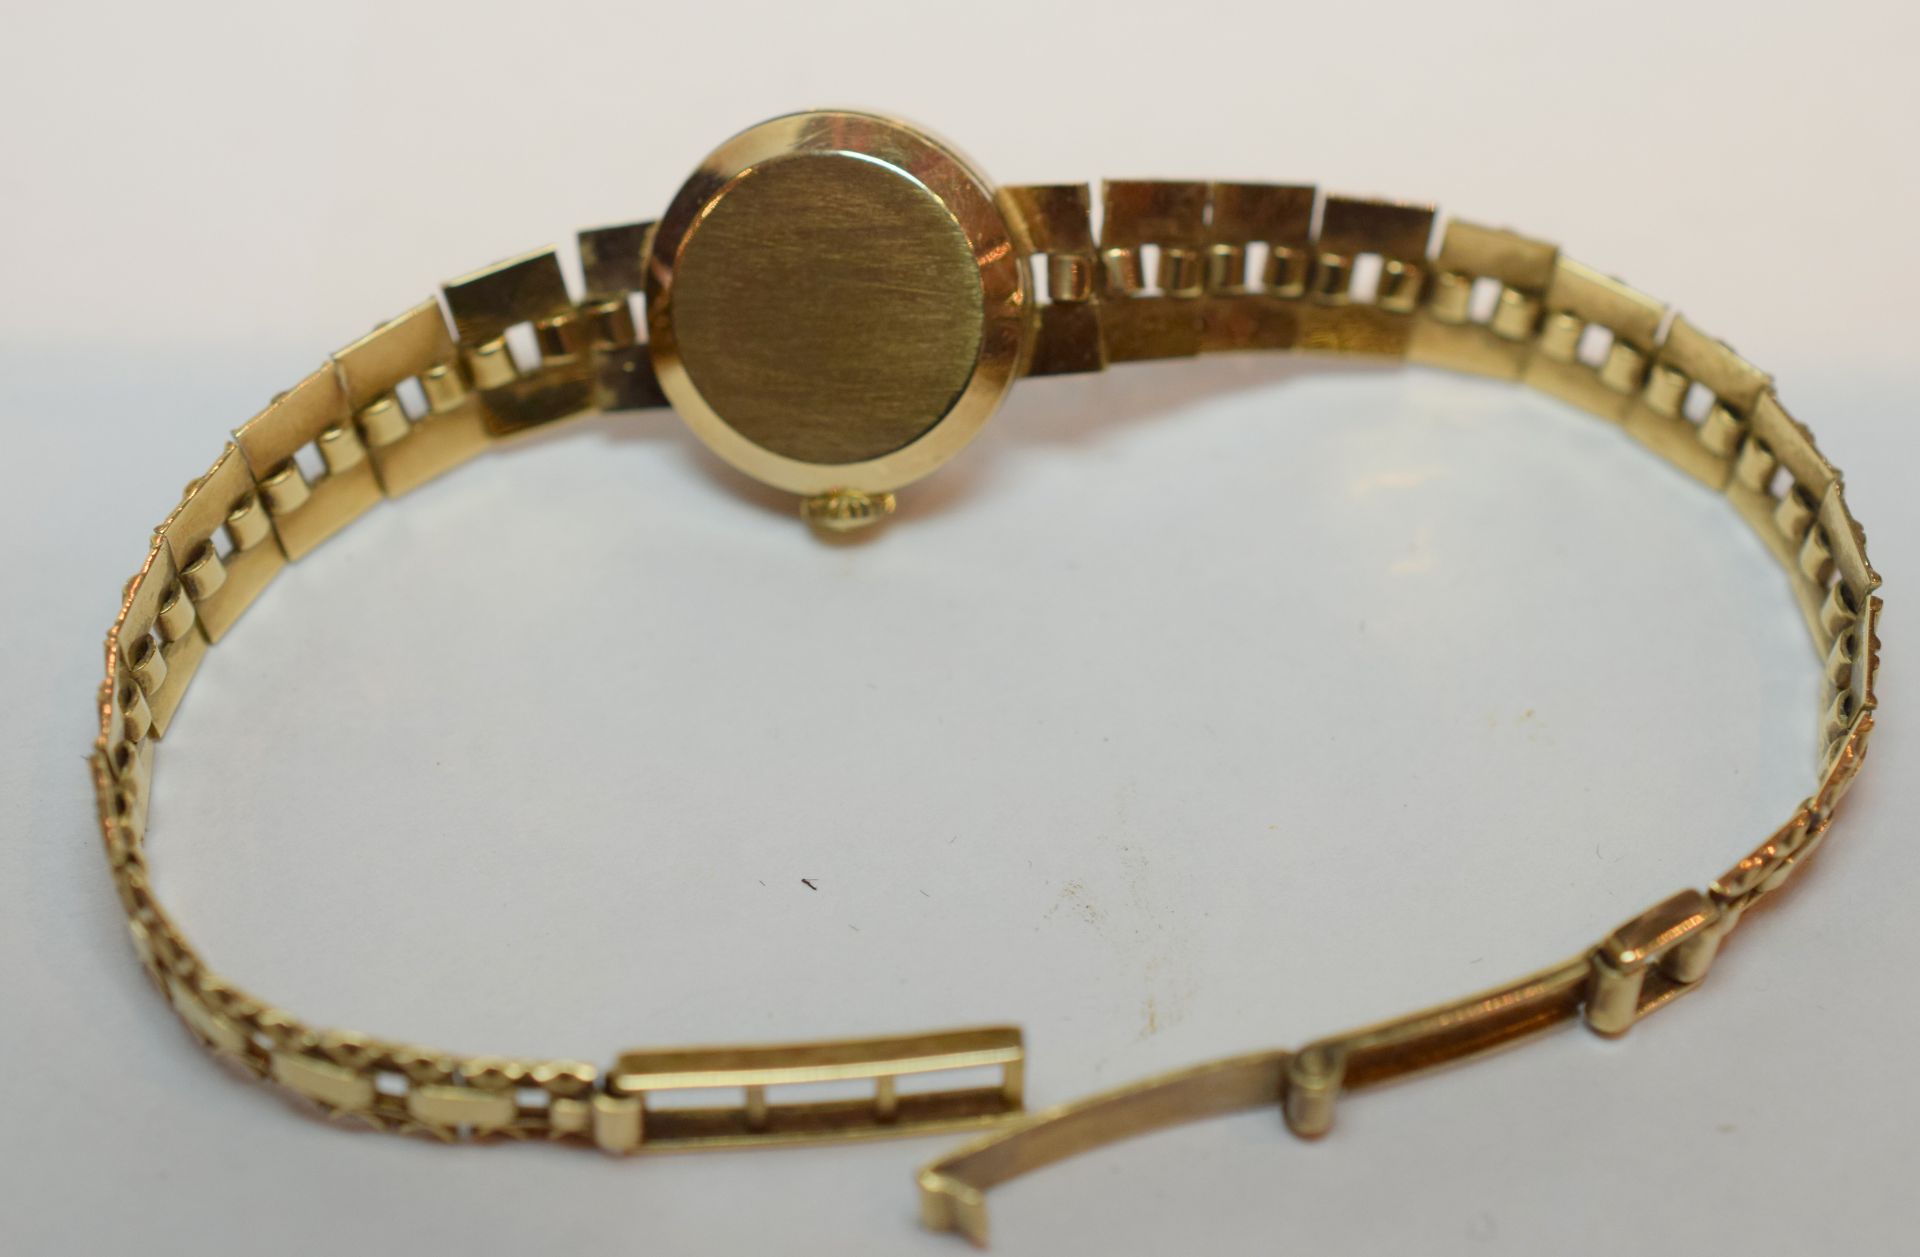 9ct Gold Lady's Accurist Watch On 9ct Gold Bracelet - Image 4 of 4